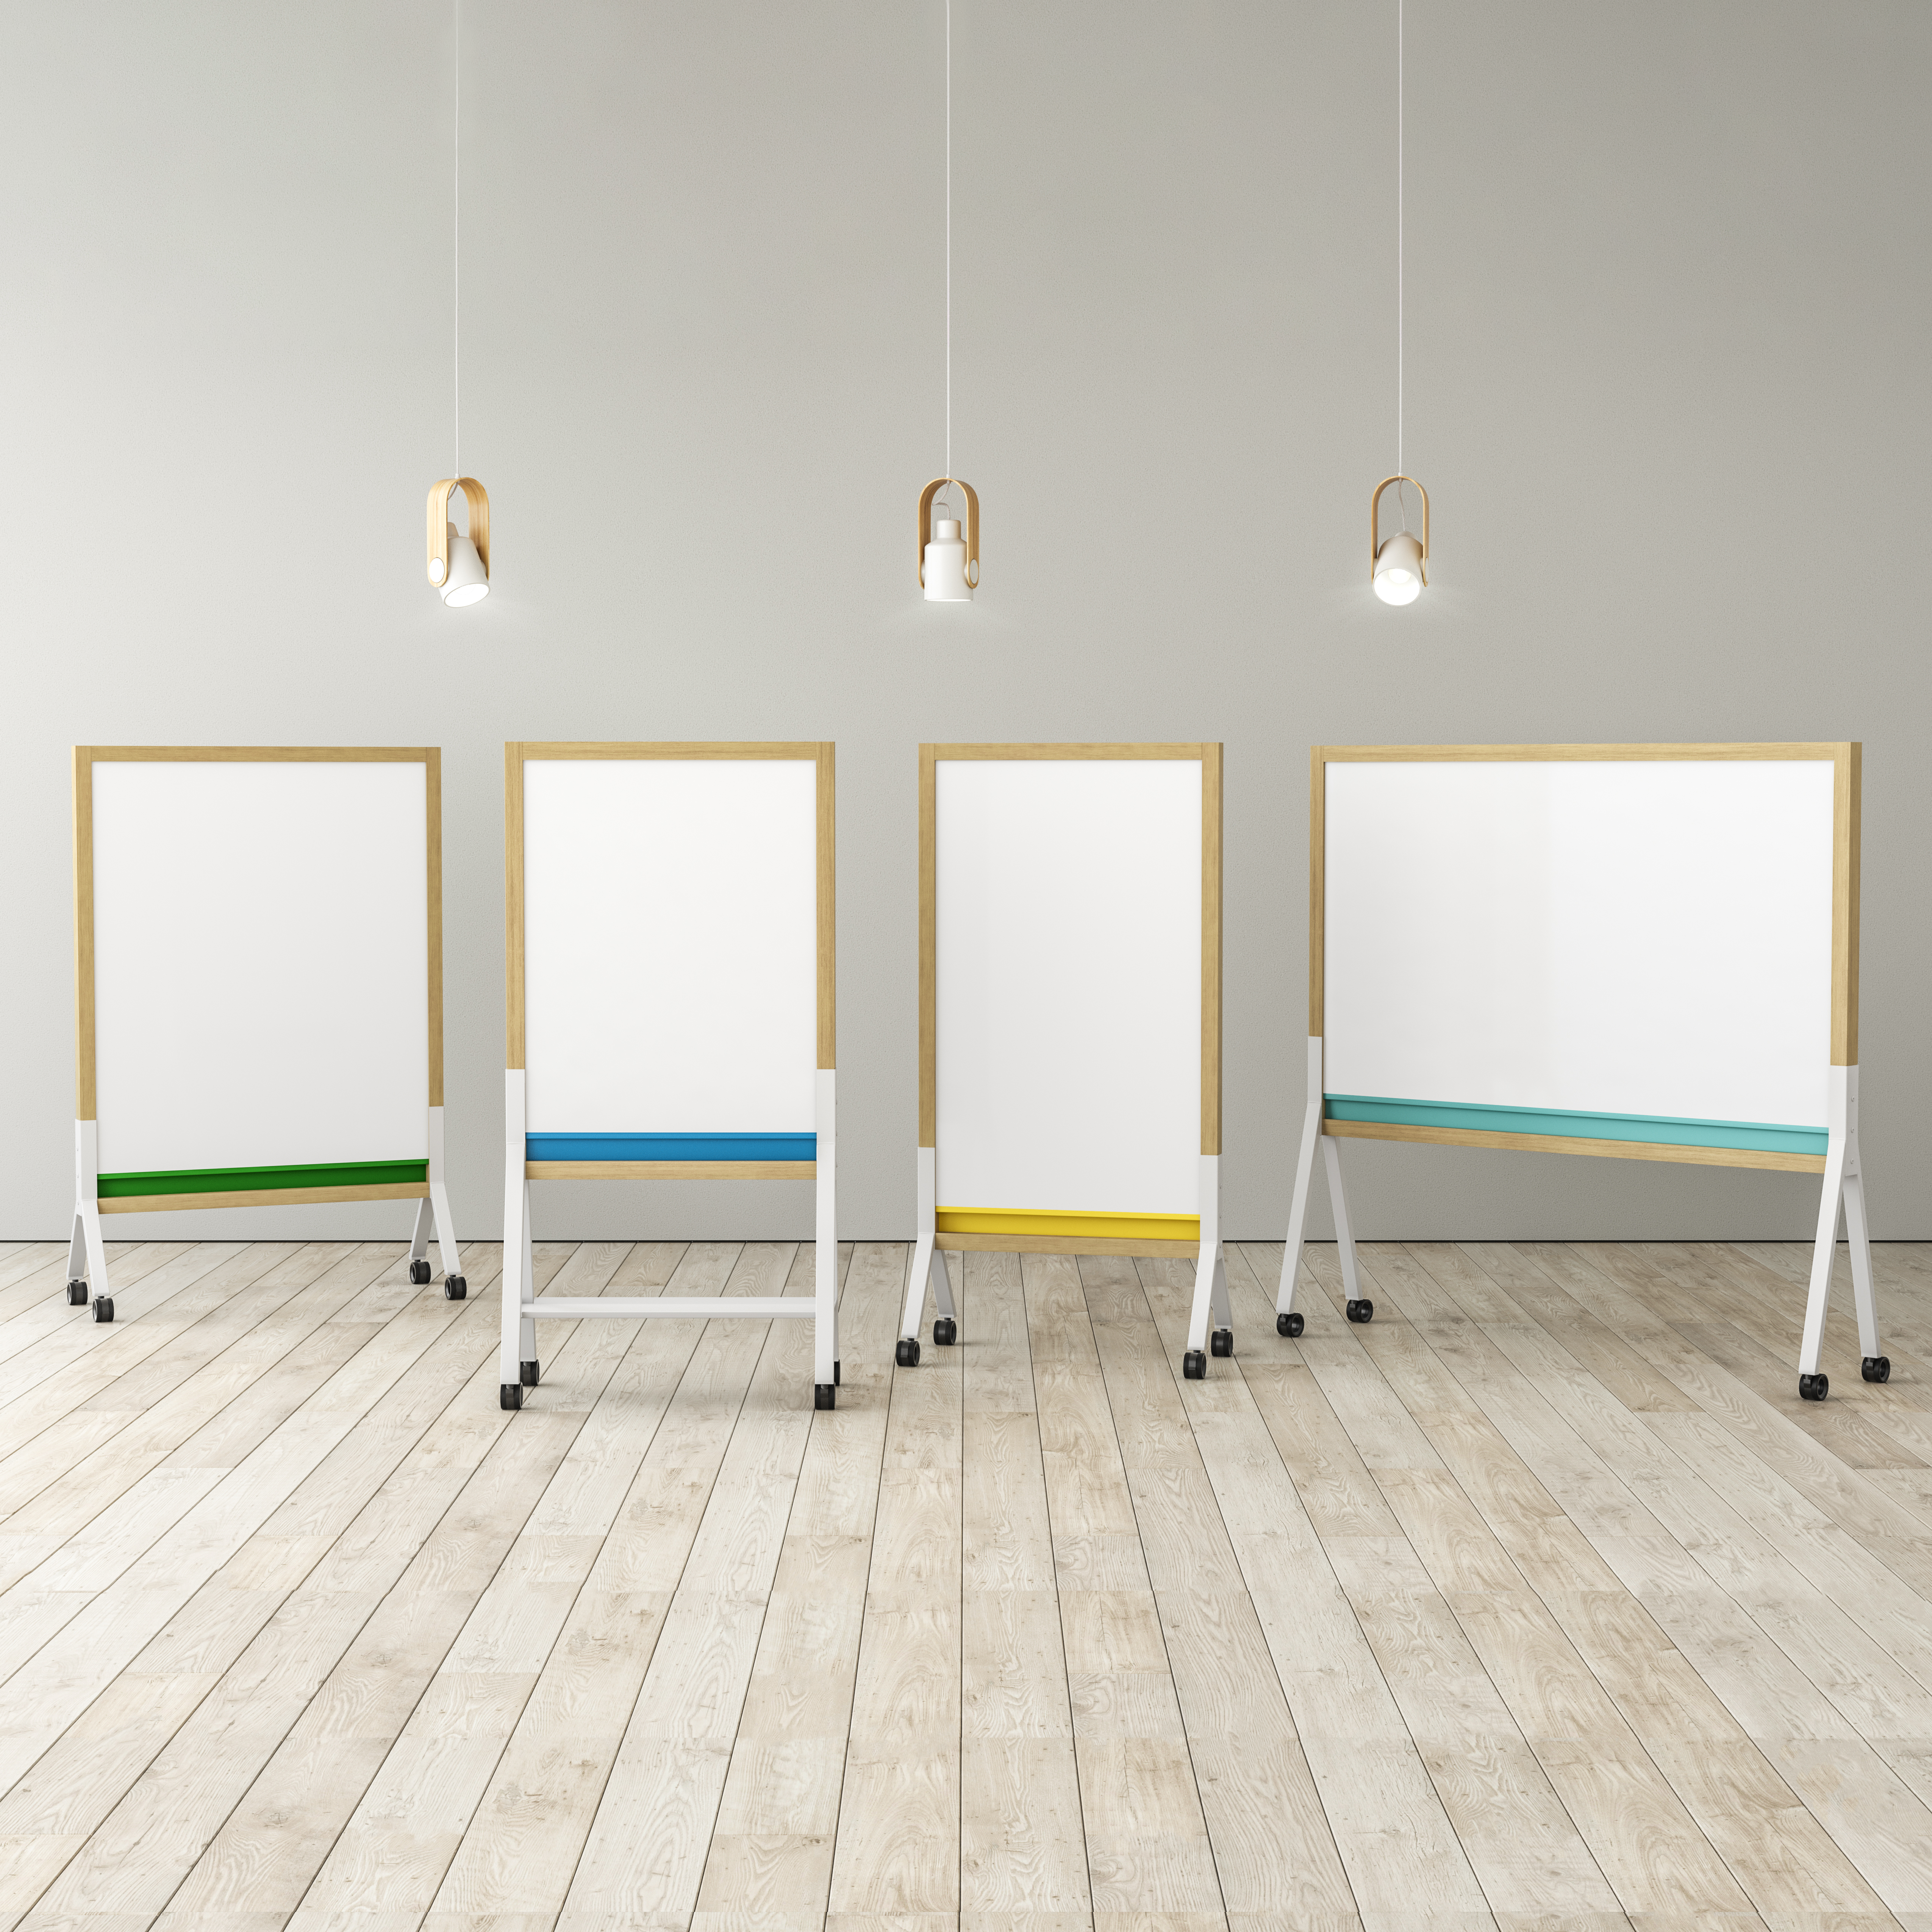 MIX Contemporary Mobile Whiteboards